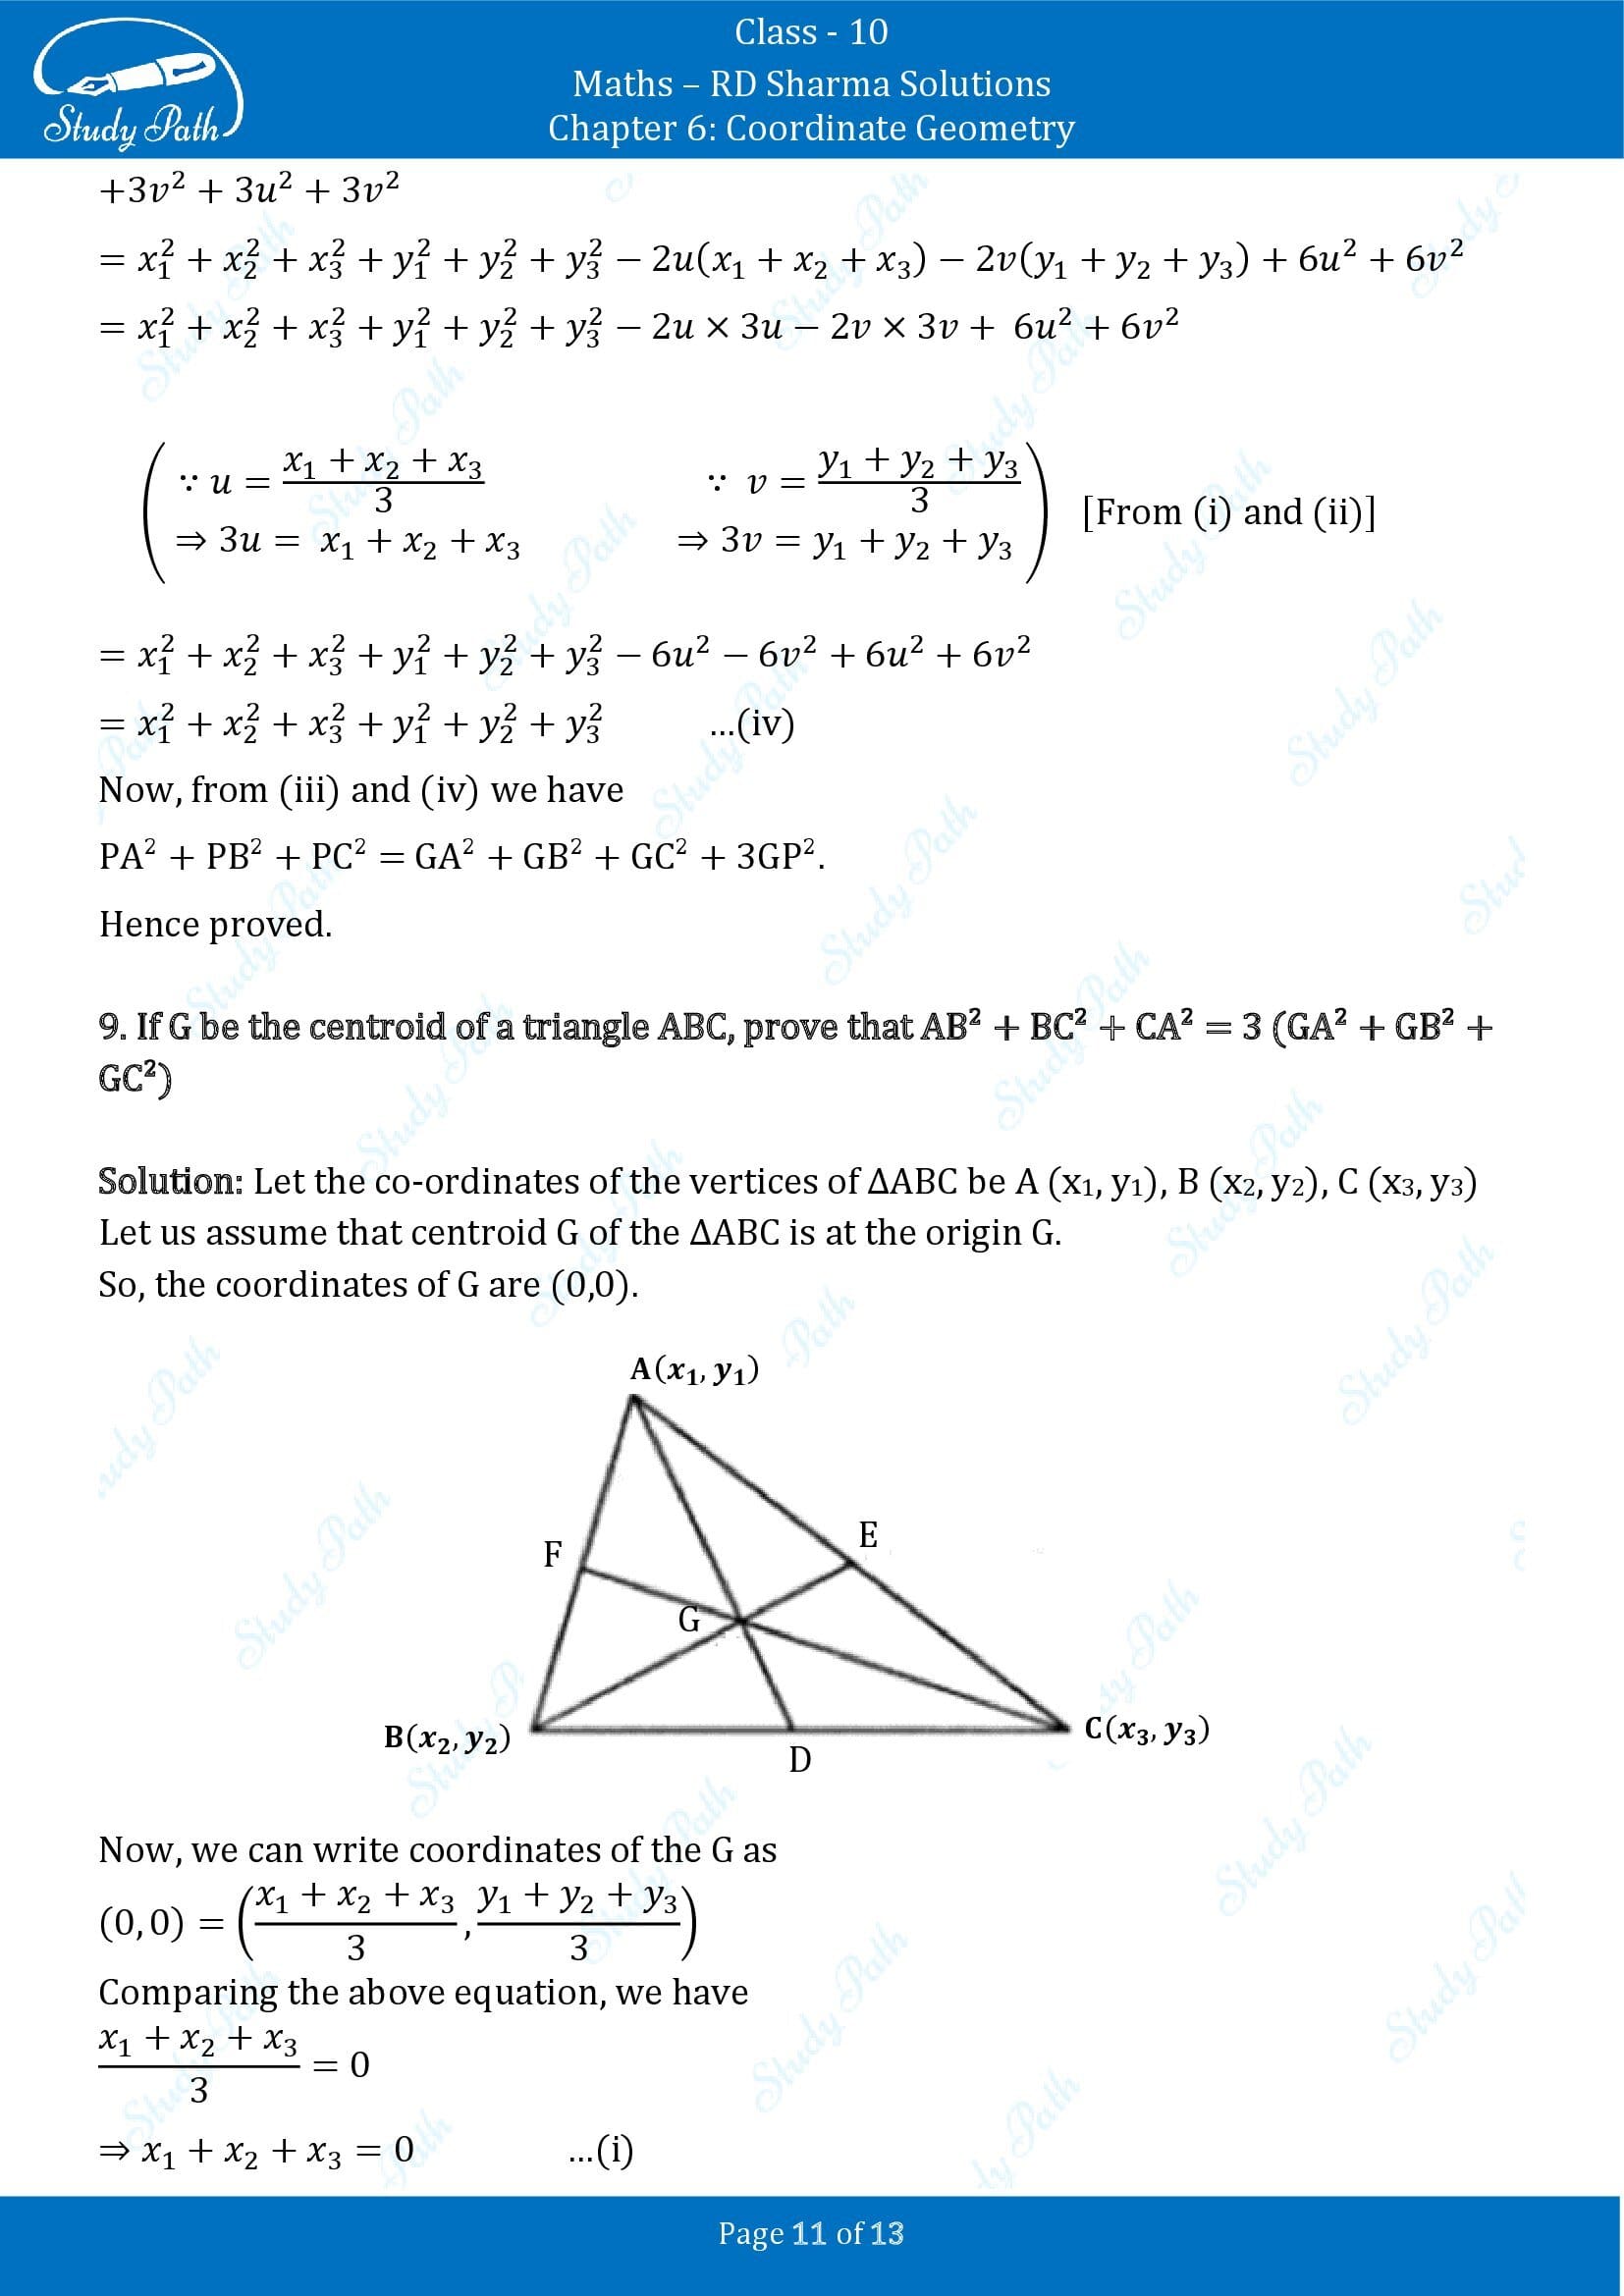 RD Sharma Solutions Class 10 Chapter 6 Coordinate Geometry Exercise 6.4 00011